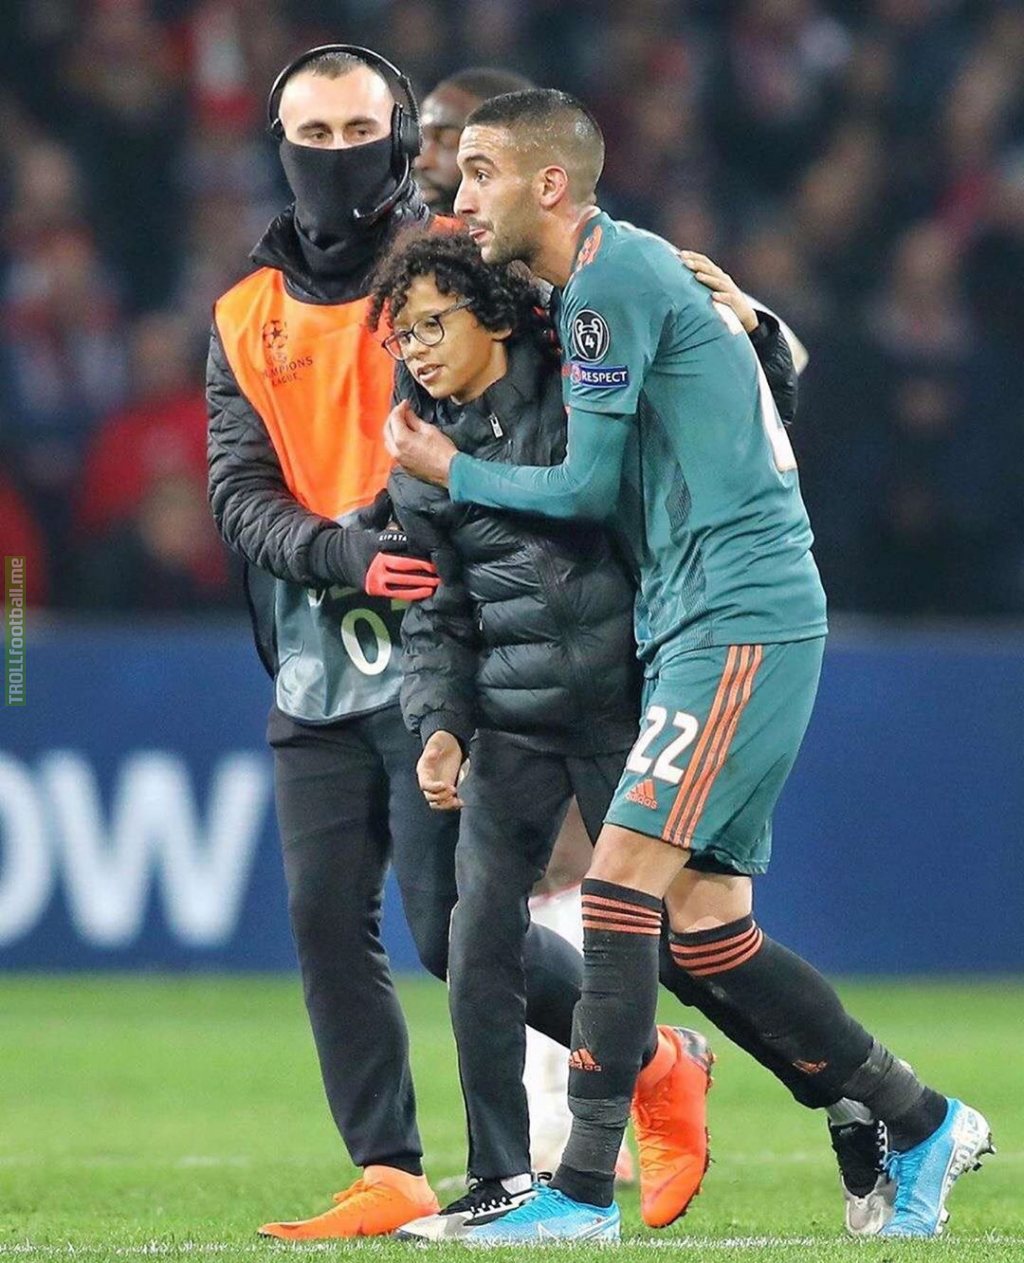 Ziyech is asking his followers on Instagram for help to get in touch with the boy who ran on field at the game Lille-Ajax. After the match someone who pro-claimed to be the boys father got his shirt.